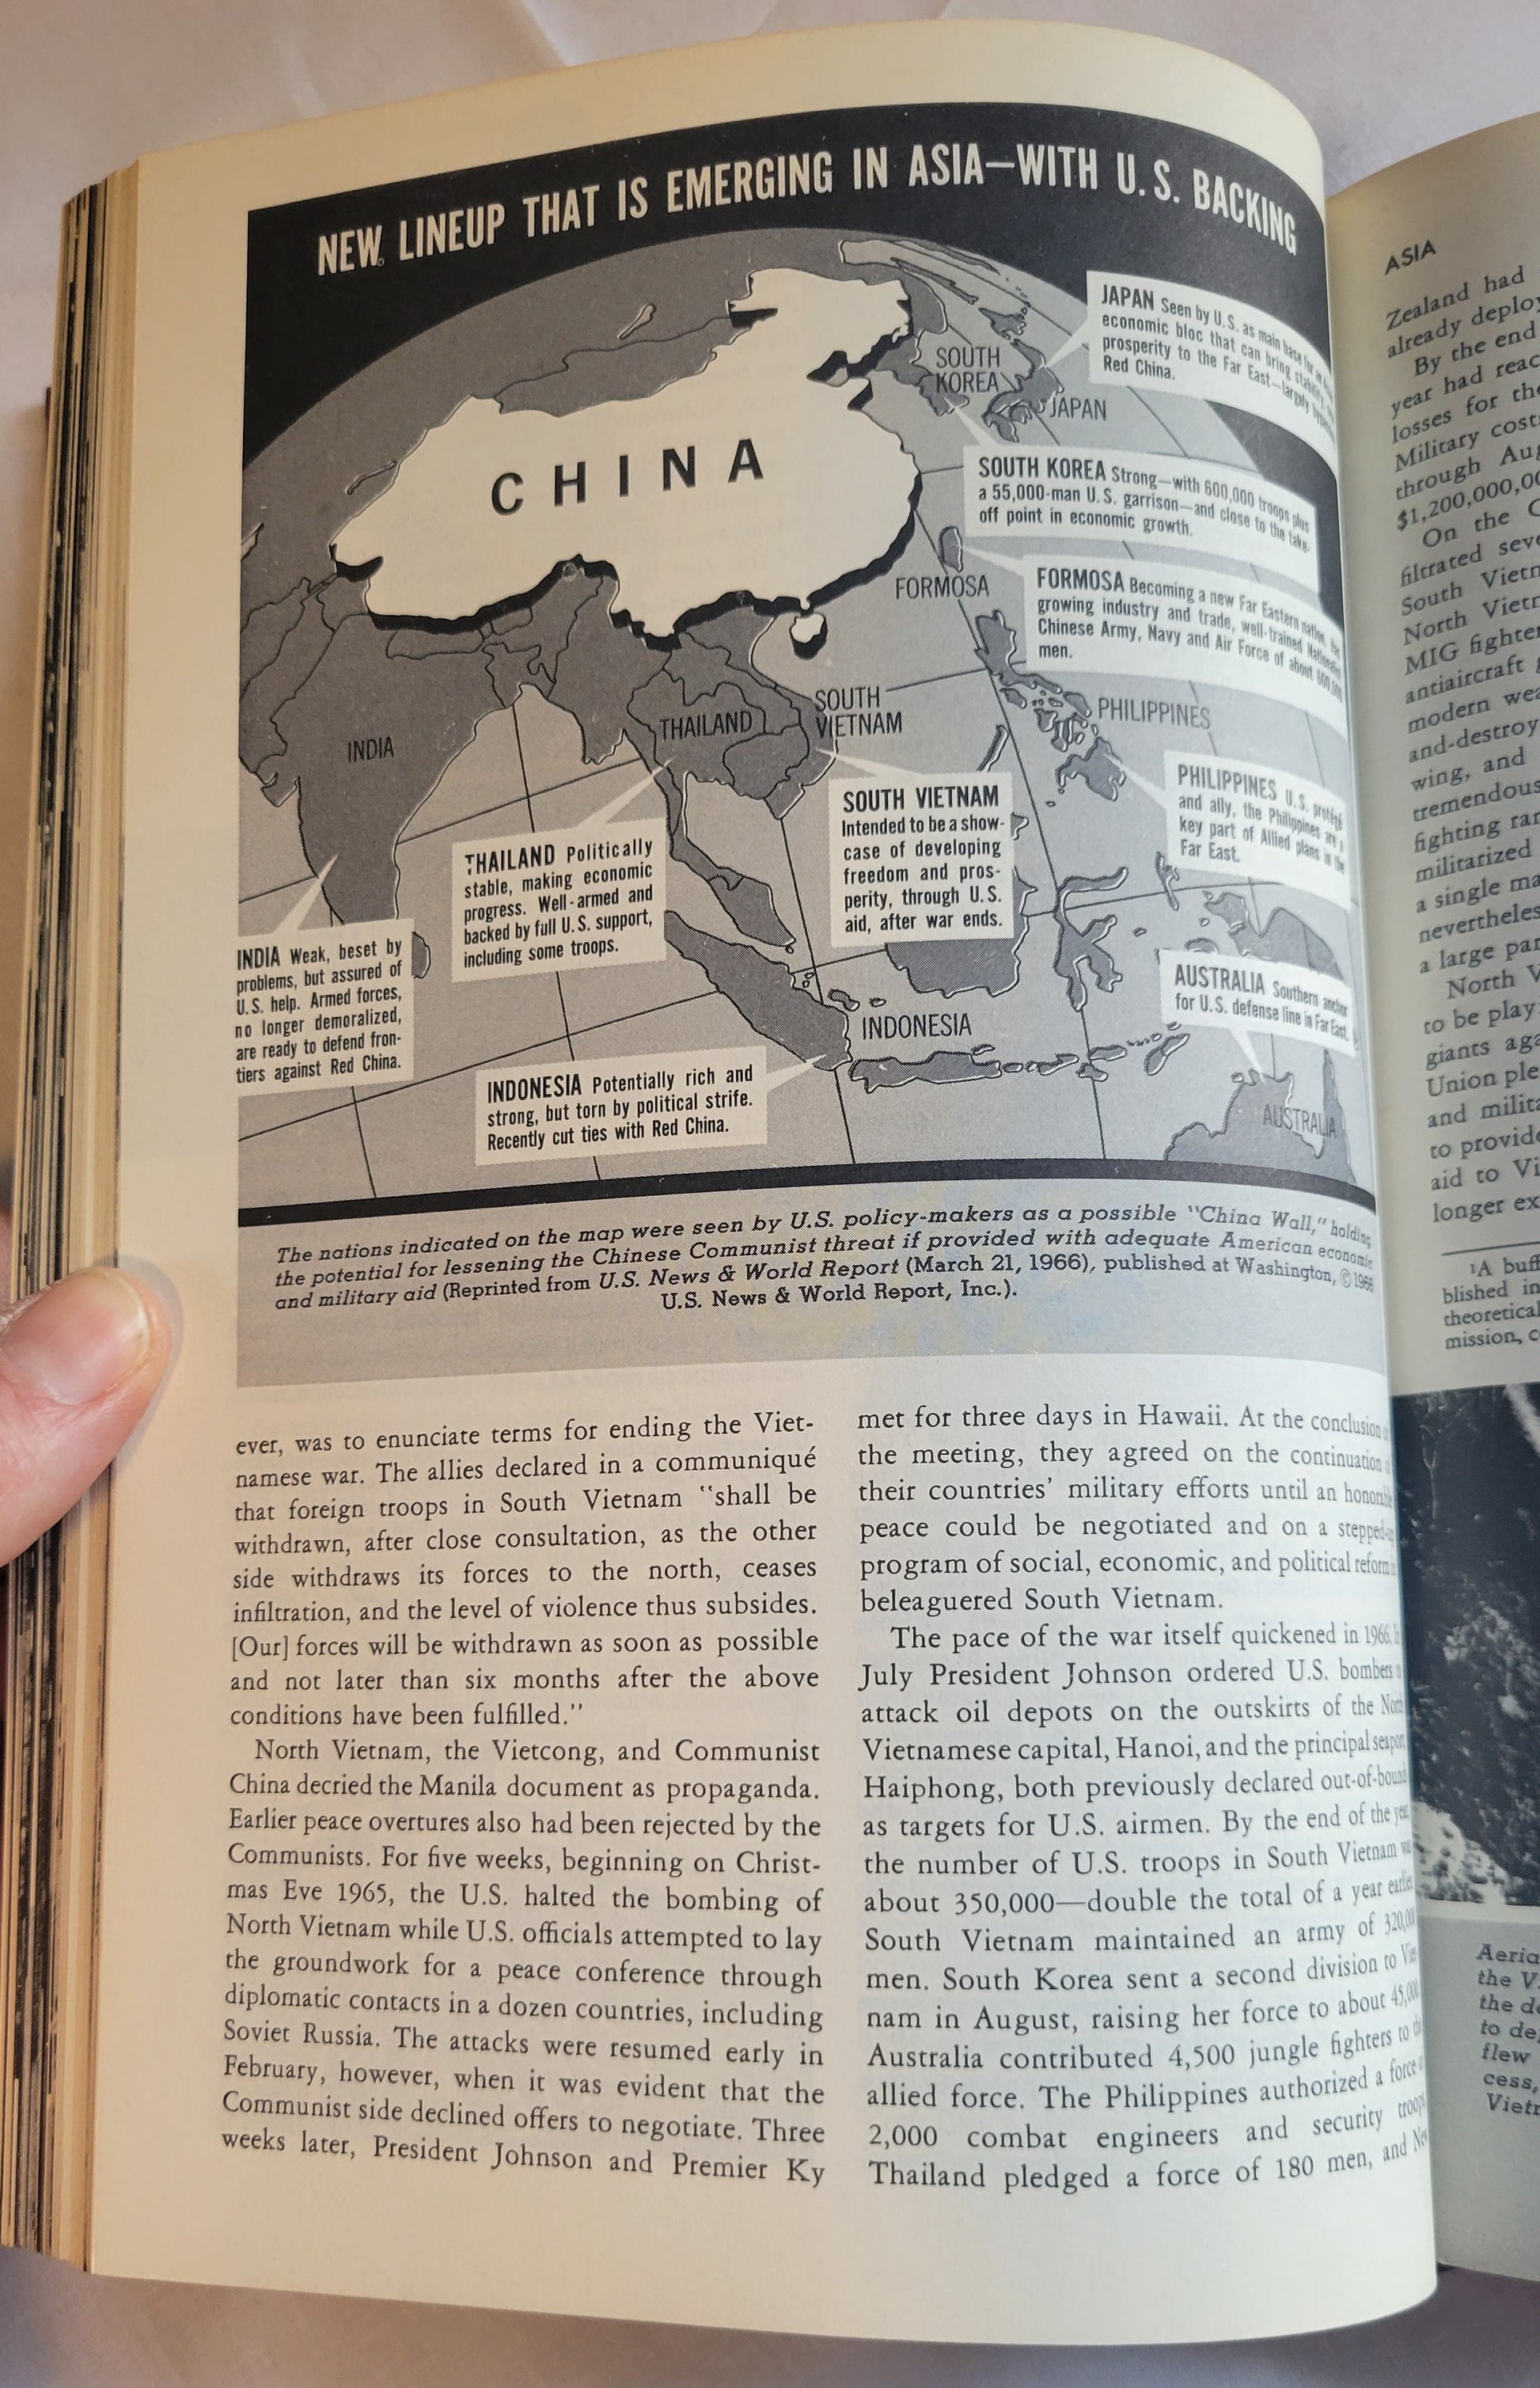 Vintage book for sale "Illustrated World Encyclopedia: 1967 Book-of-the-Year" published by Bobley Publishing in 1967. An encyclopedia of world events in 1967, with pictures and graphics. View of illustration.